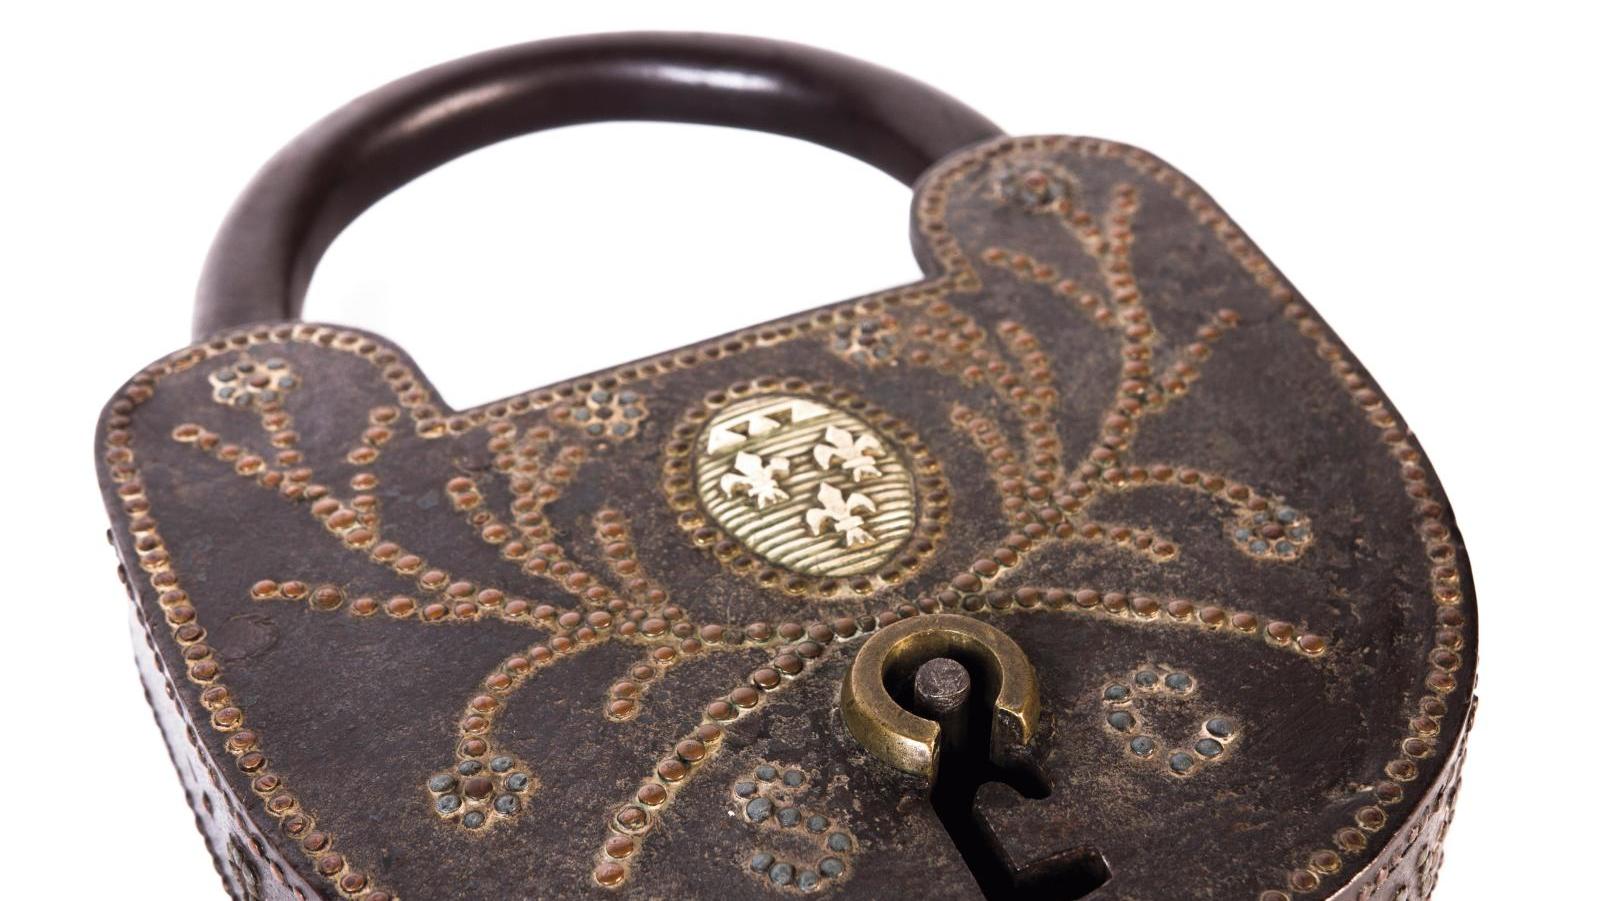 Late 17th-early 18th century, riveted wrought iron padlock, inlaid with brass and... Royal Memories of Saint-Cloud